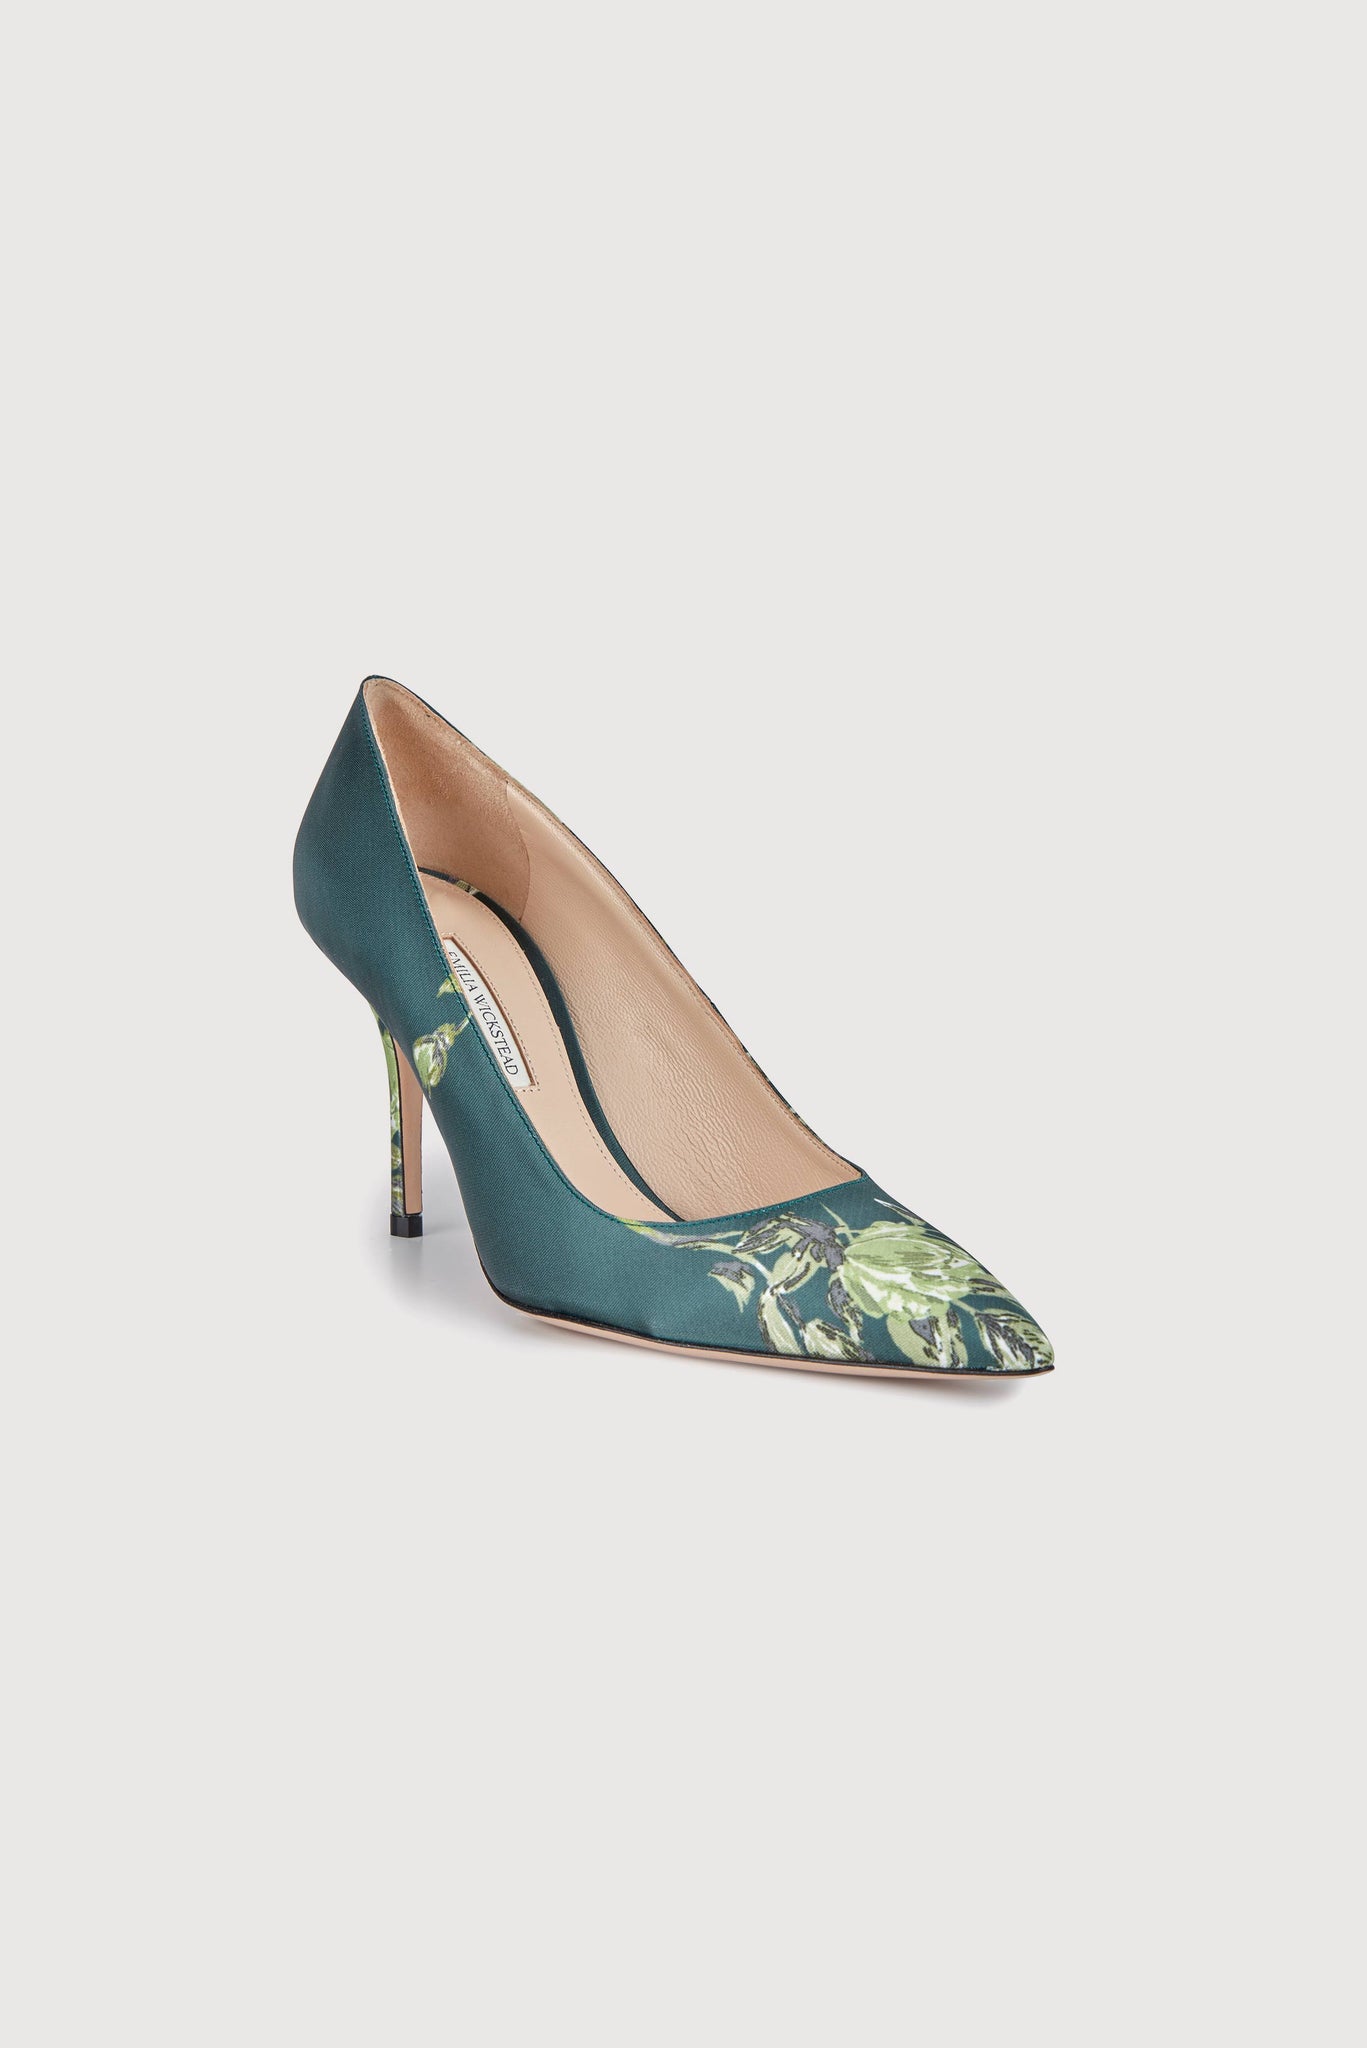 Sophia Heeled Shoes in Emerald Floral Printed Satin